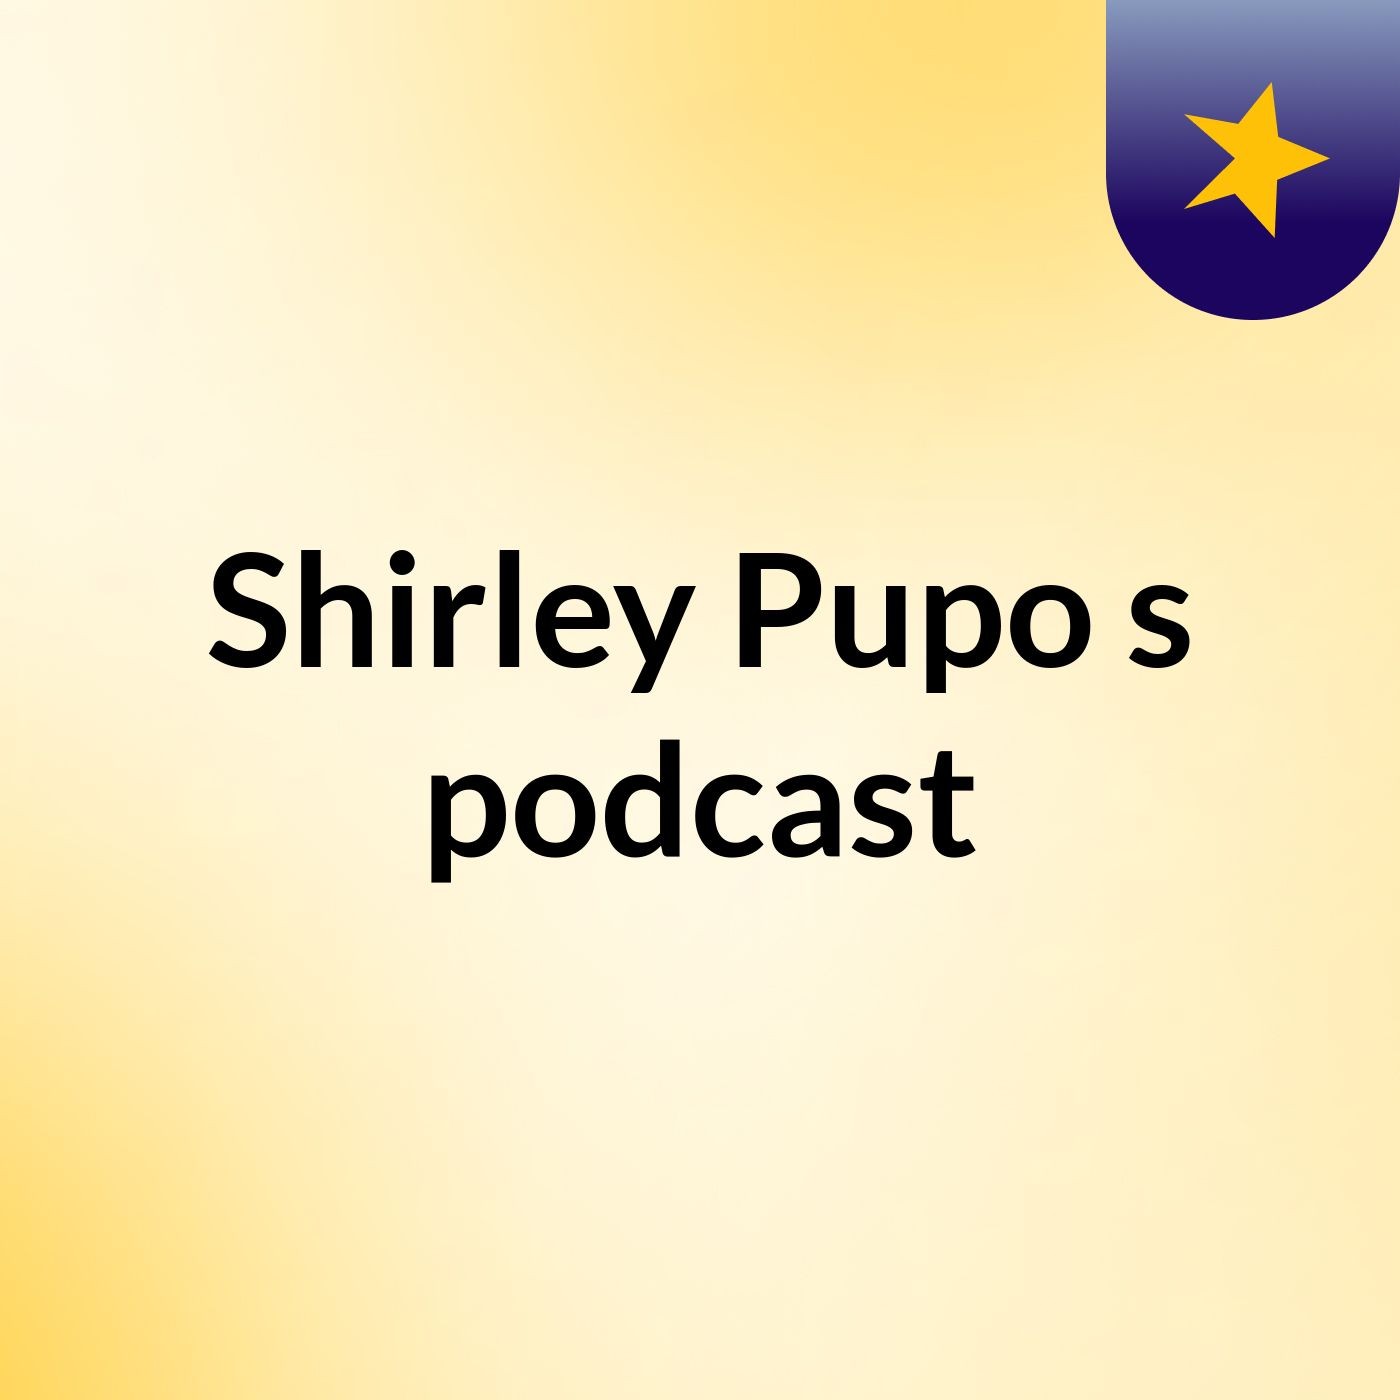 Shirley Pupo's podcast